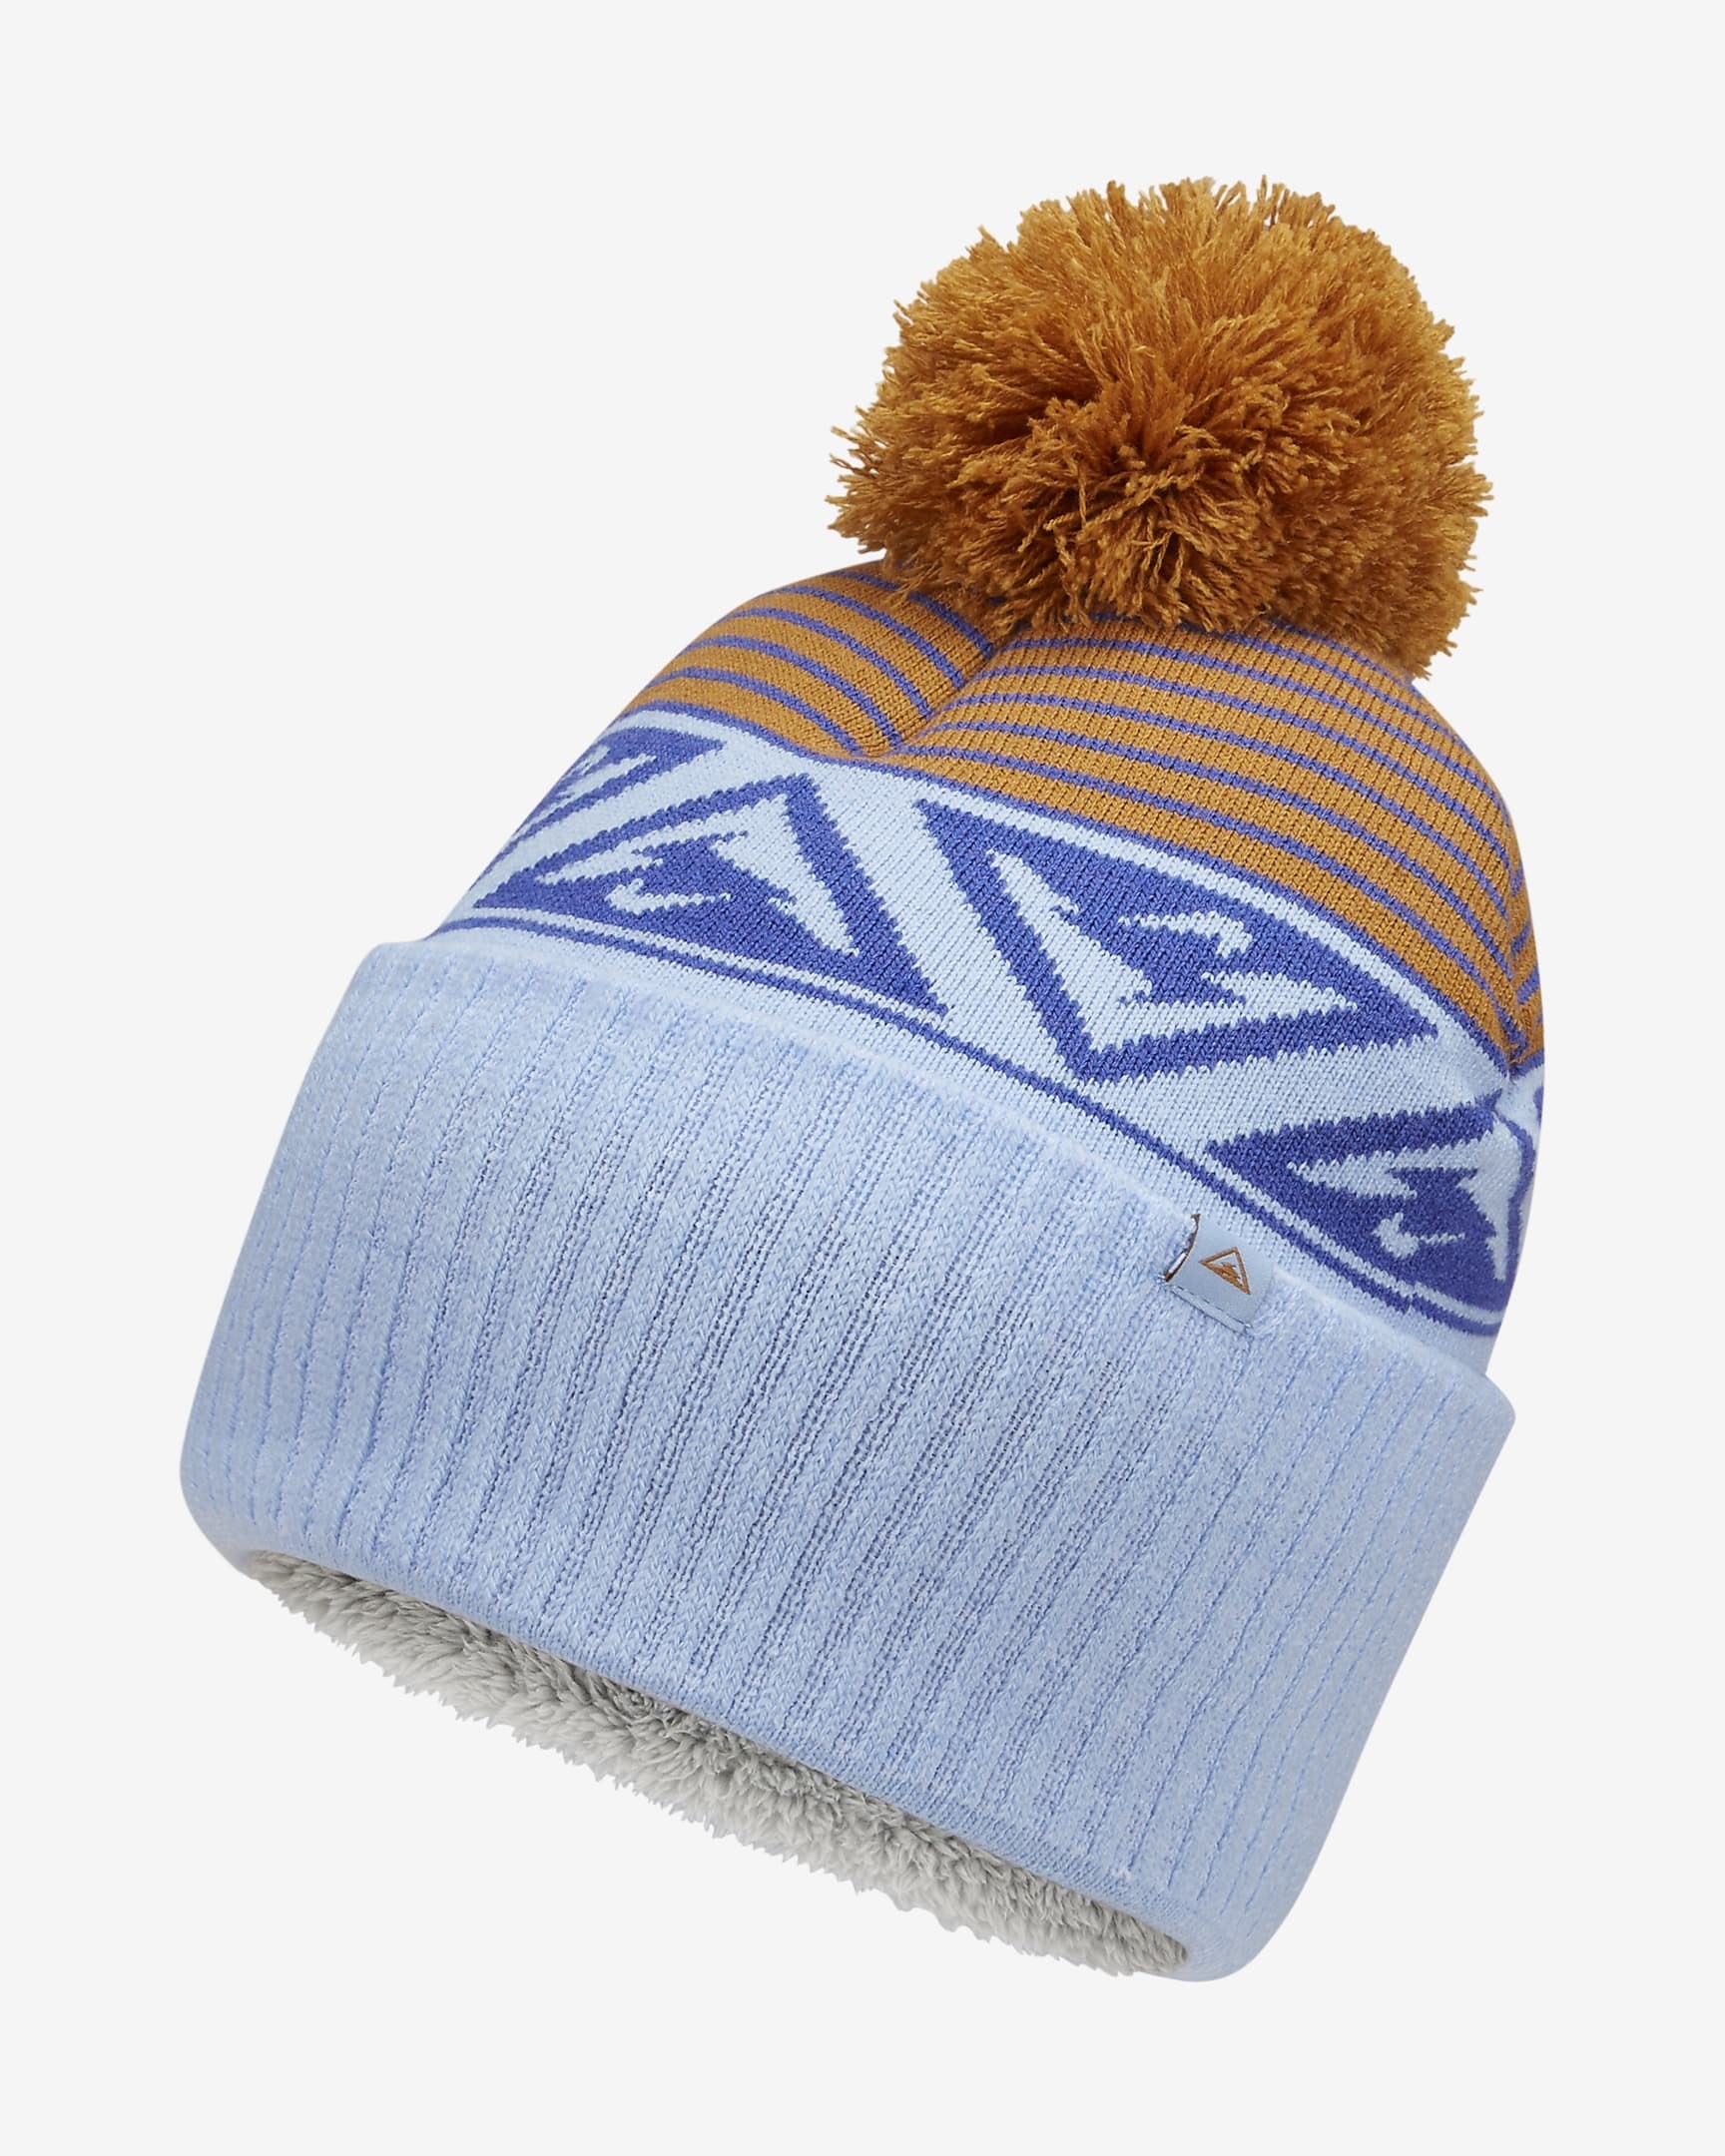 The blue and gold beanie featuring gold pom-pom and multi-patterned design